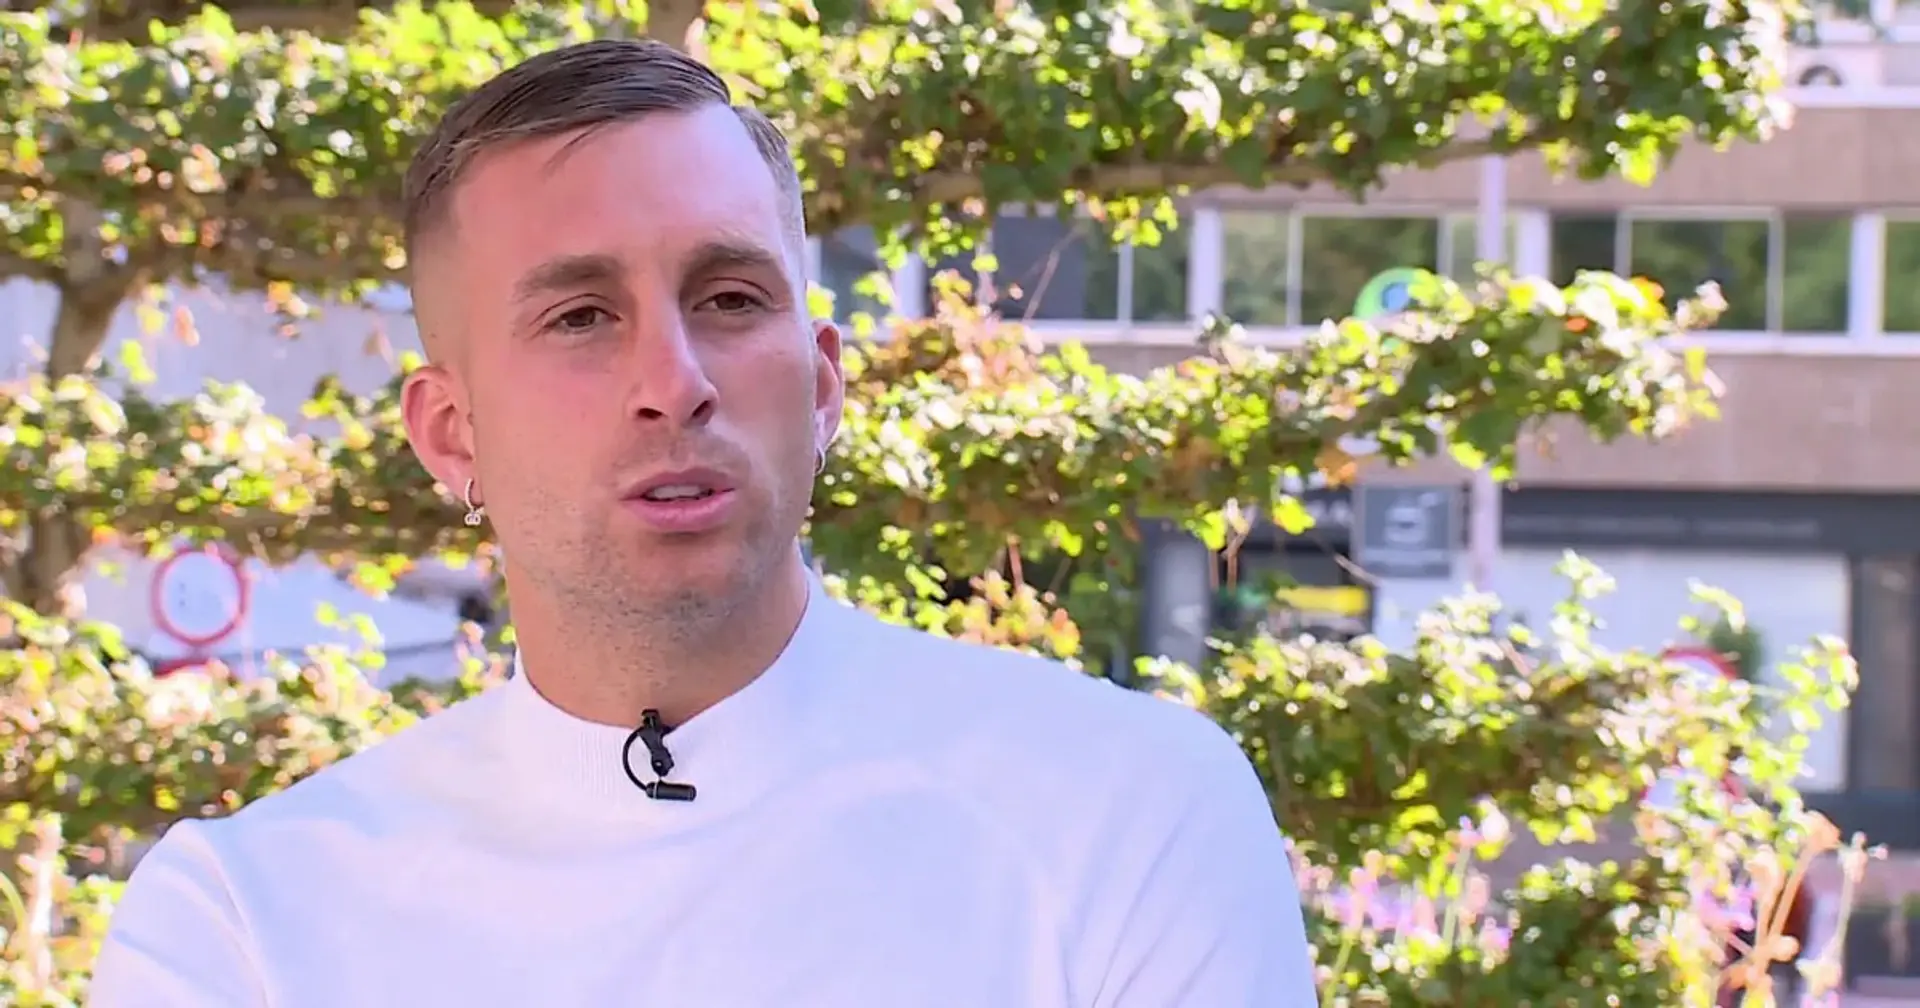 Ex-La Masia Deulofeu explains why he'd join Real Madrid but not return to Barca